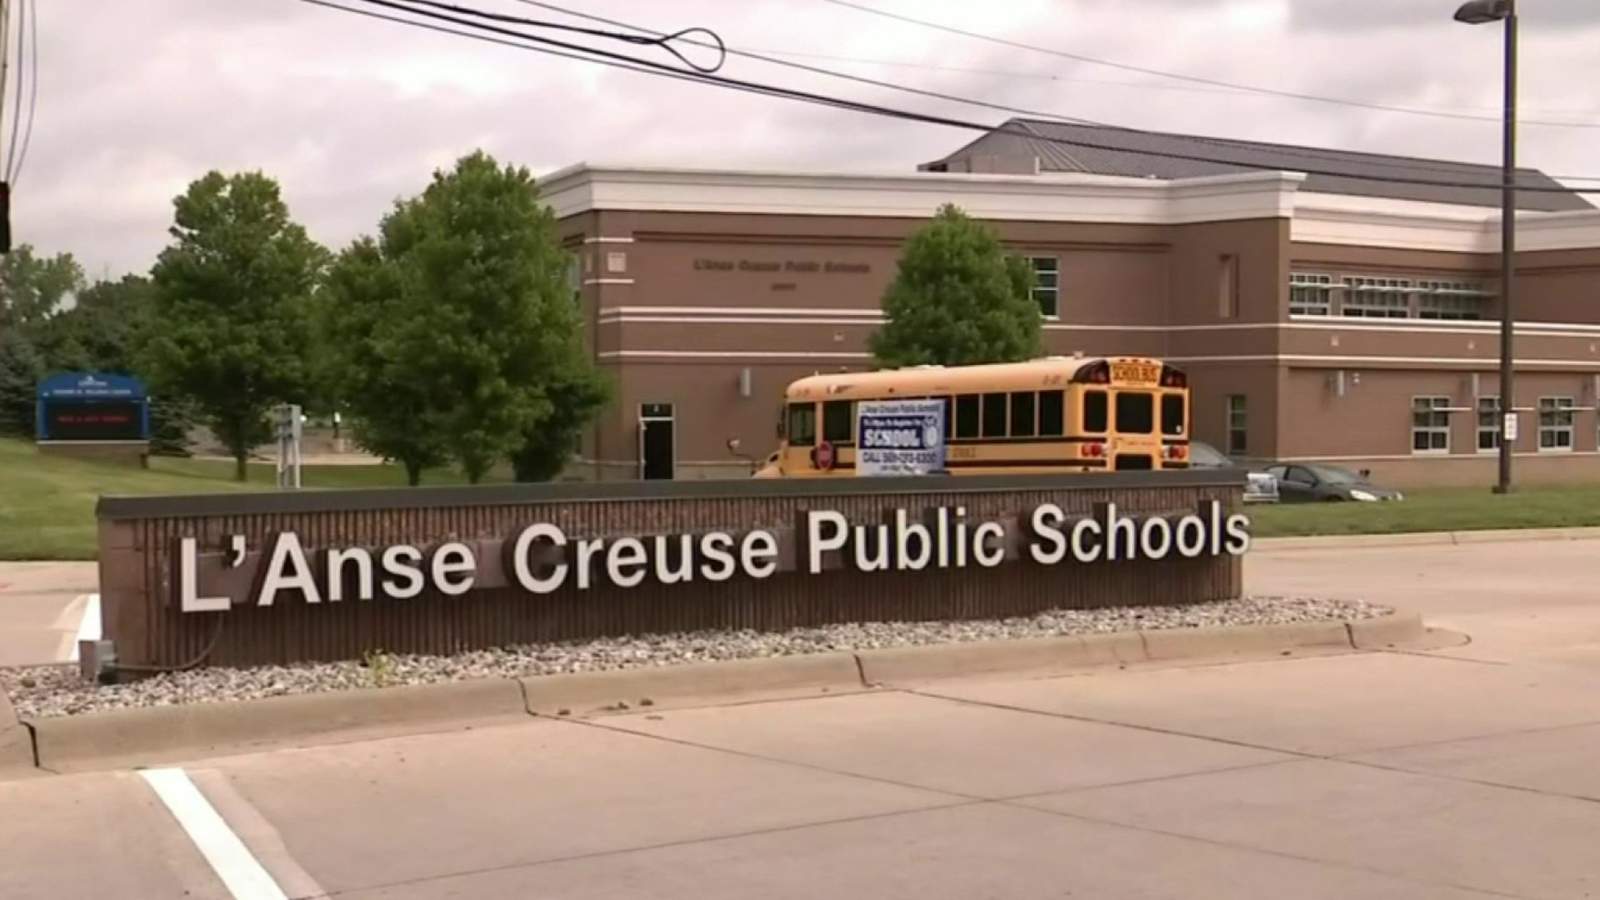 LAnse Creuse Public Schools face backlash from teachers for back-to-school plan